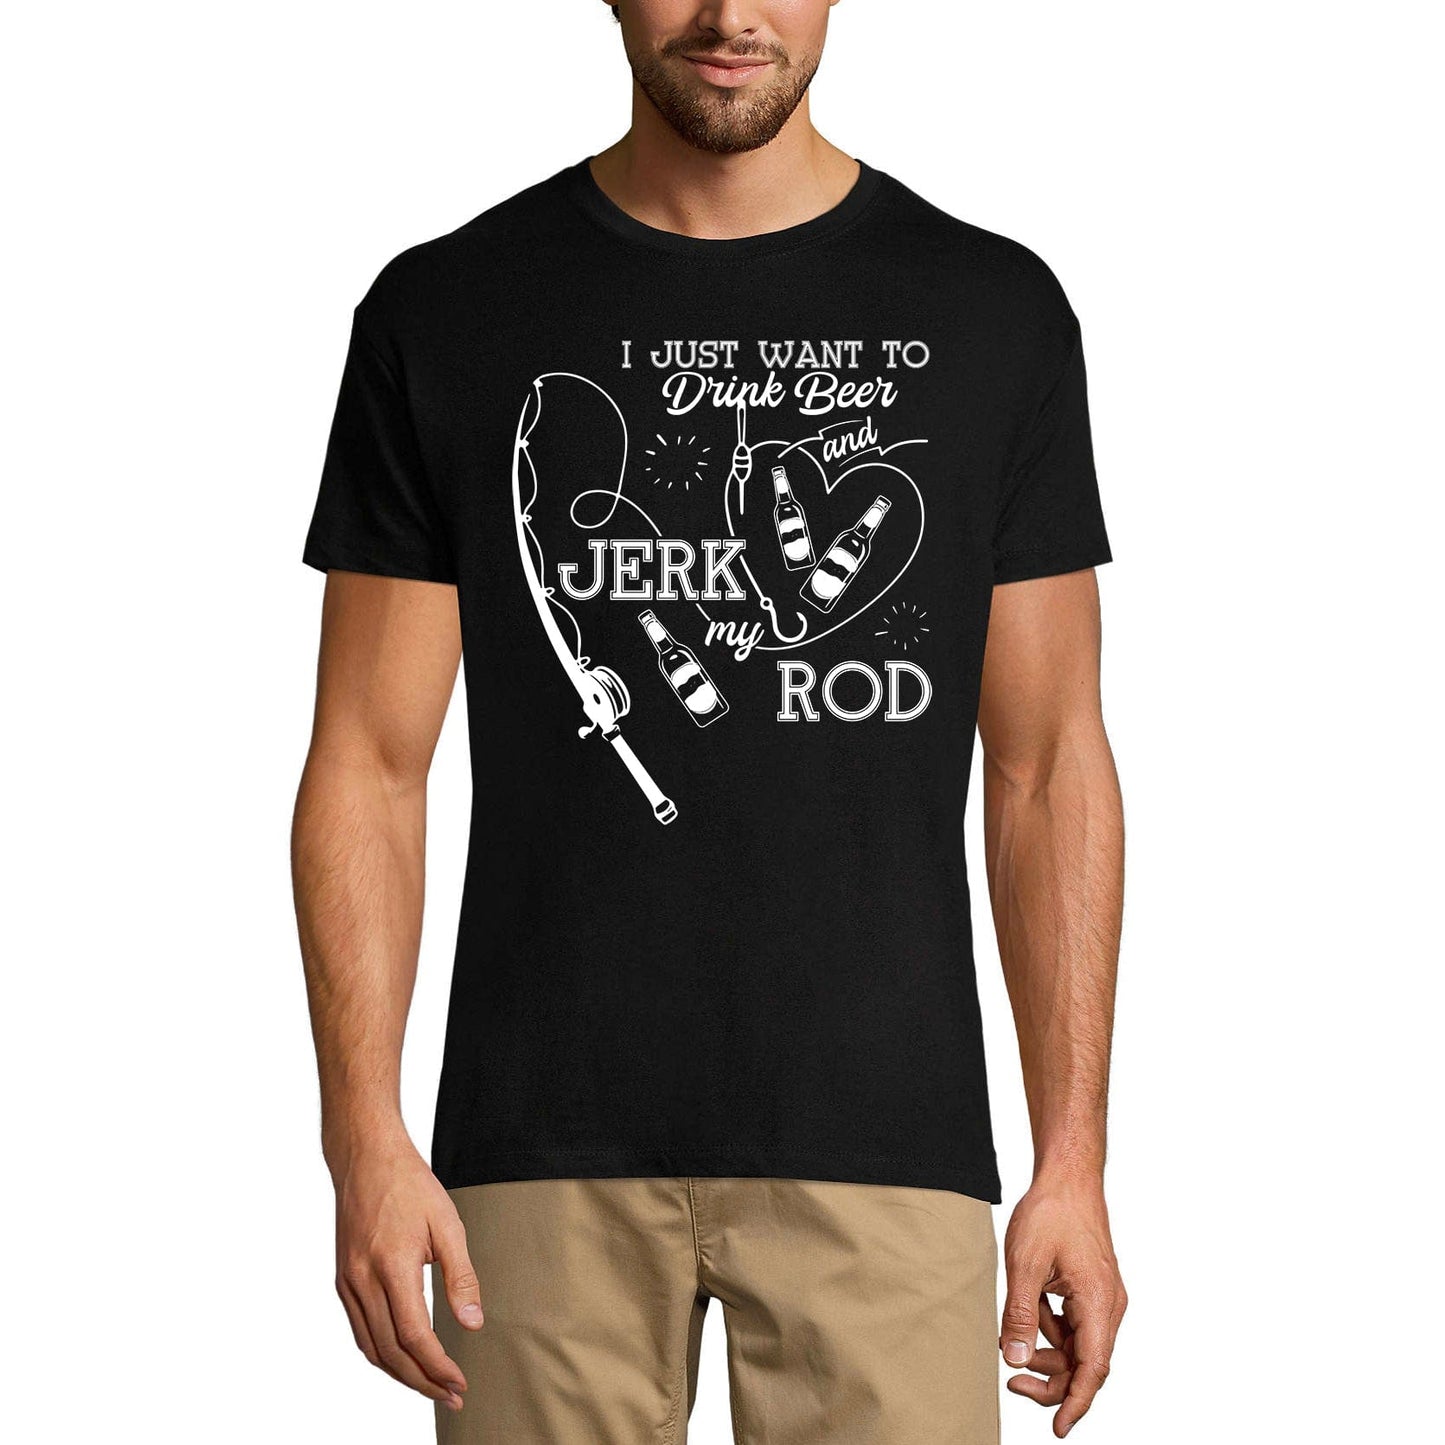 ULTRABASIC Men's T-Shirt I Just Want to Drink Beer and Jerk My Rod - Funny Fisherman Tee Shirt